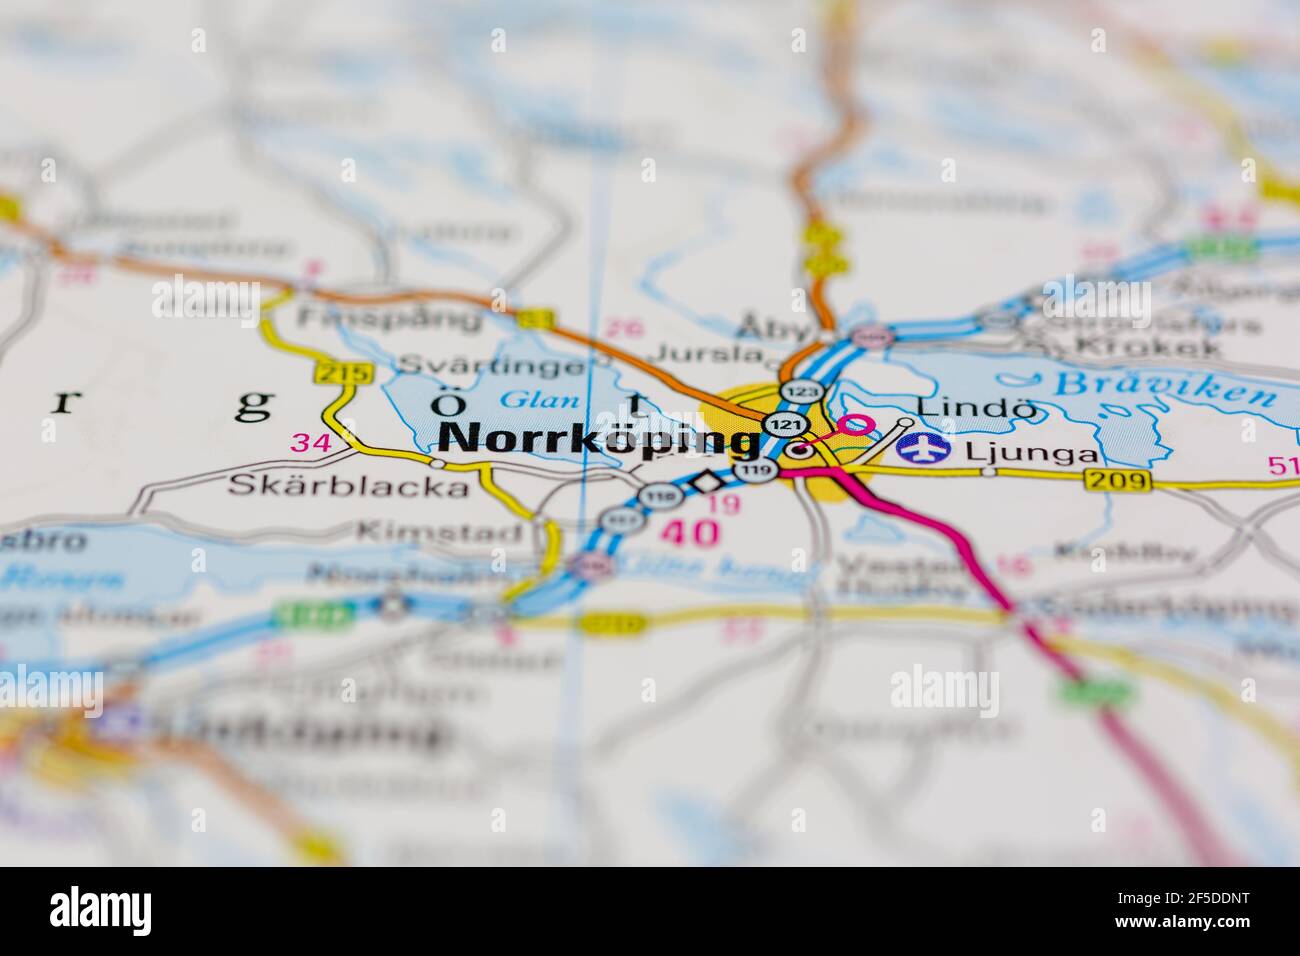 Norrkoping and surrounding areas Shown on a Geography map or road map Stock Photo